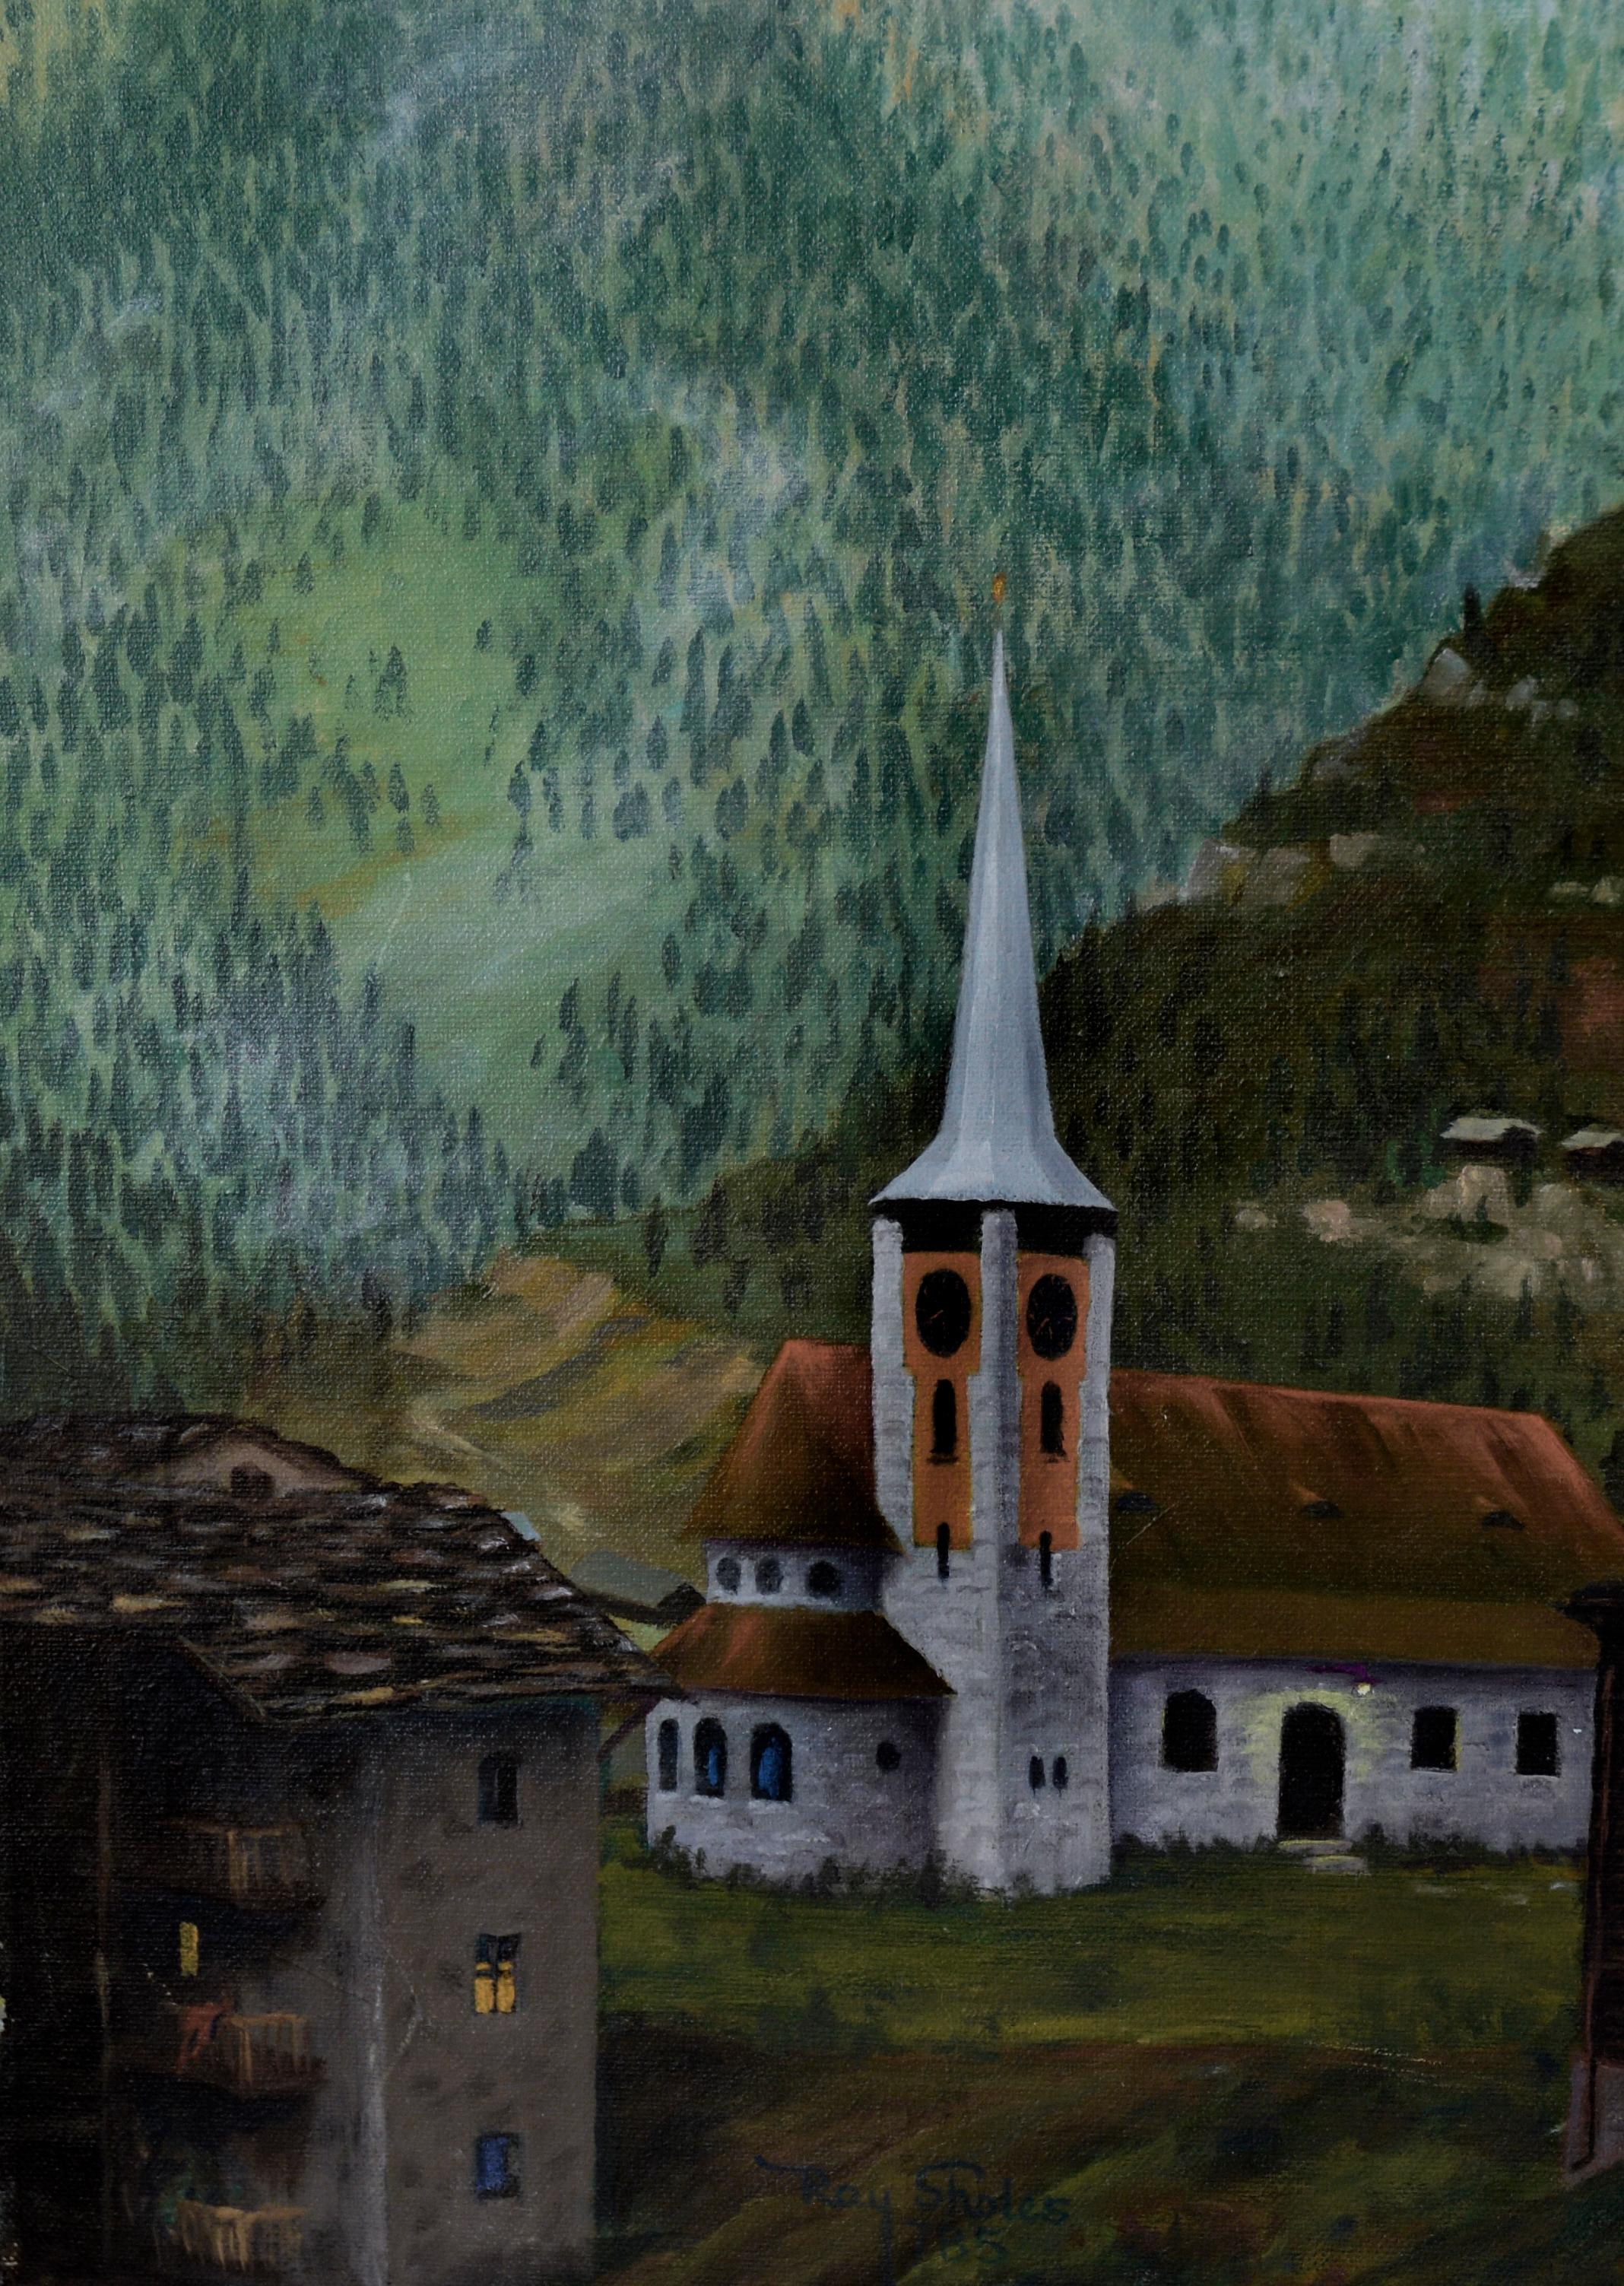 Under the Matterhorn - Acrylic on Canvas

A sleepy village sits under the shadow of the Matterhorn in this Swiss-style painting by an unknown artist. A handful of lights illuminate windows and the doorway of the church with the rest of the village